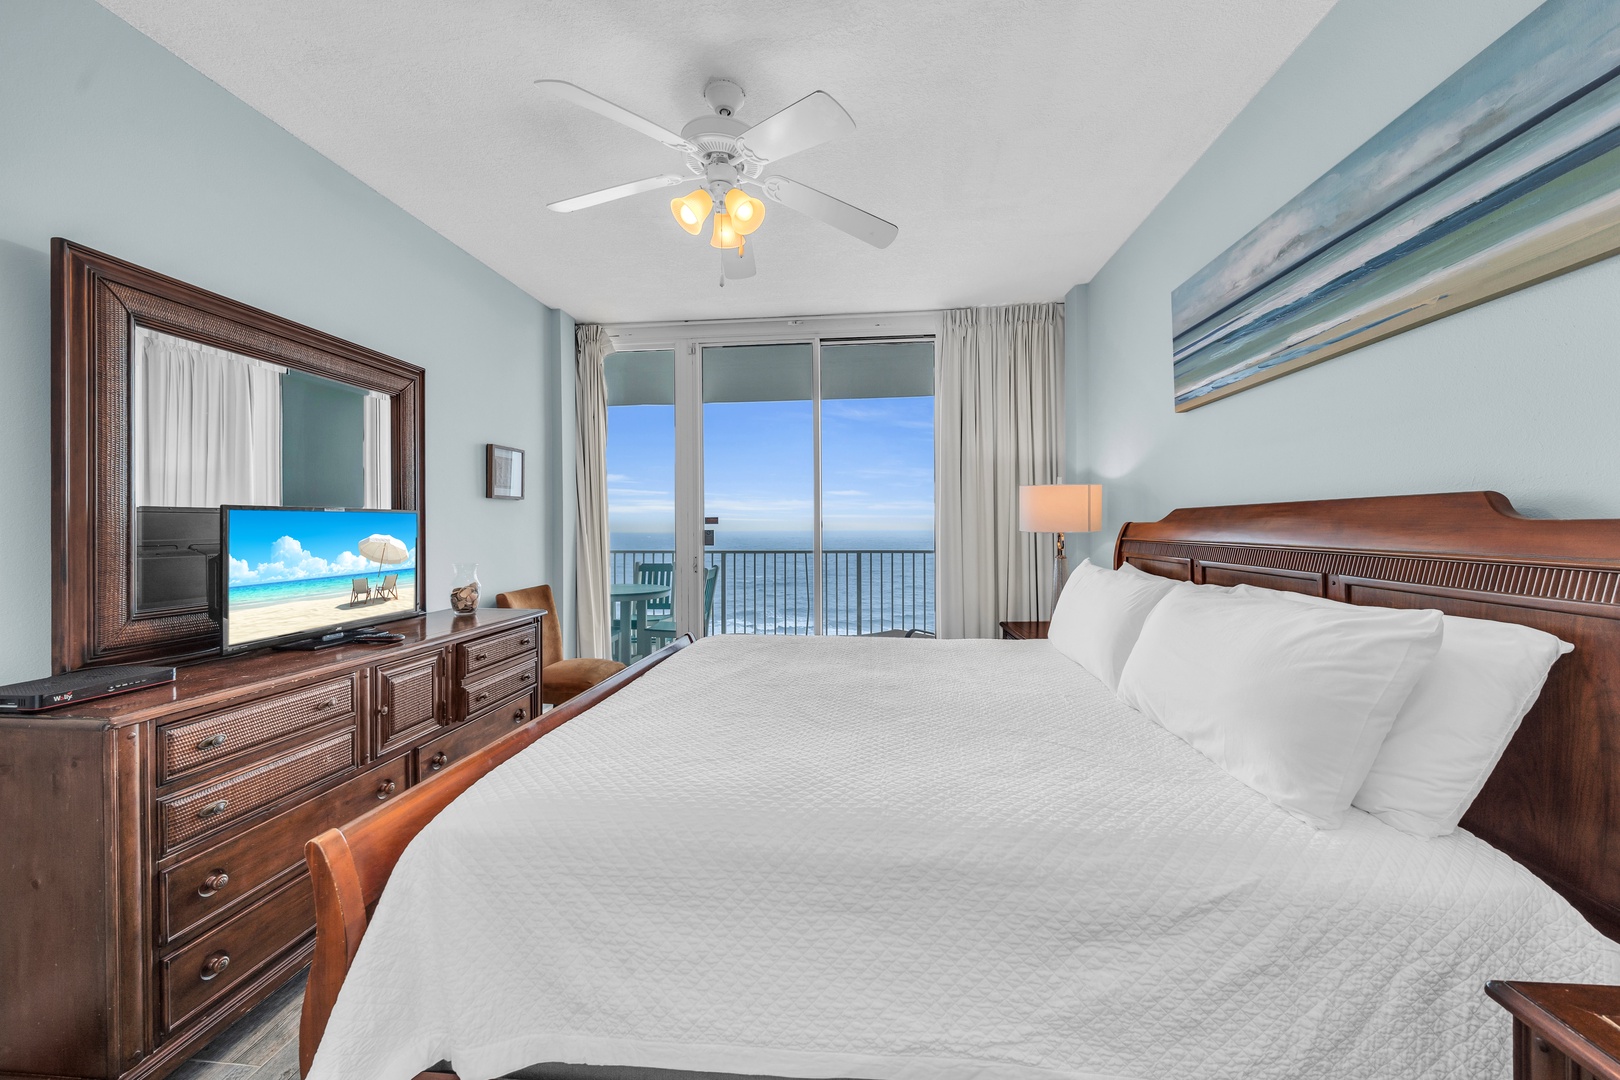 Primary bedroom with Gulf view and balcony access